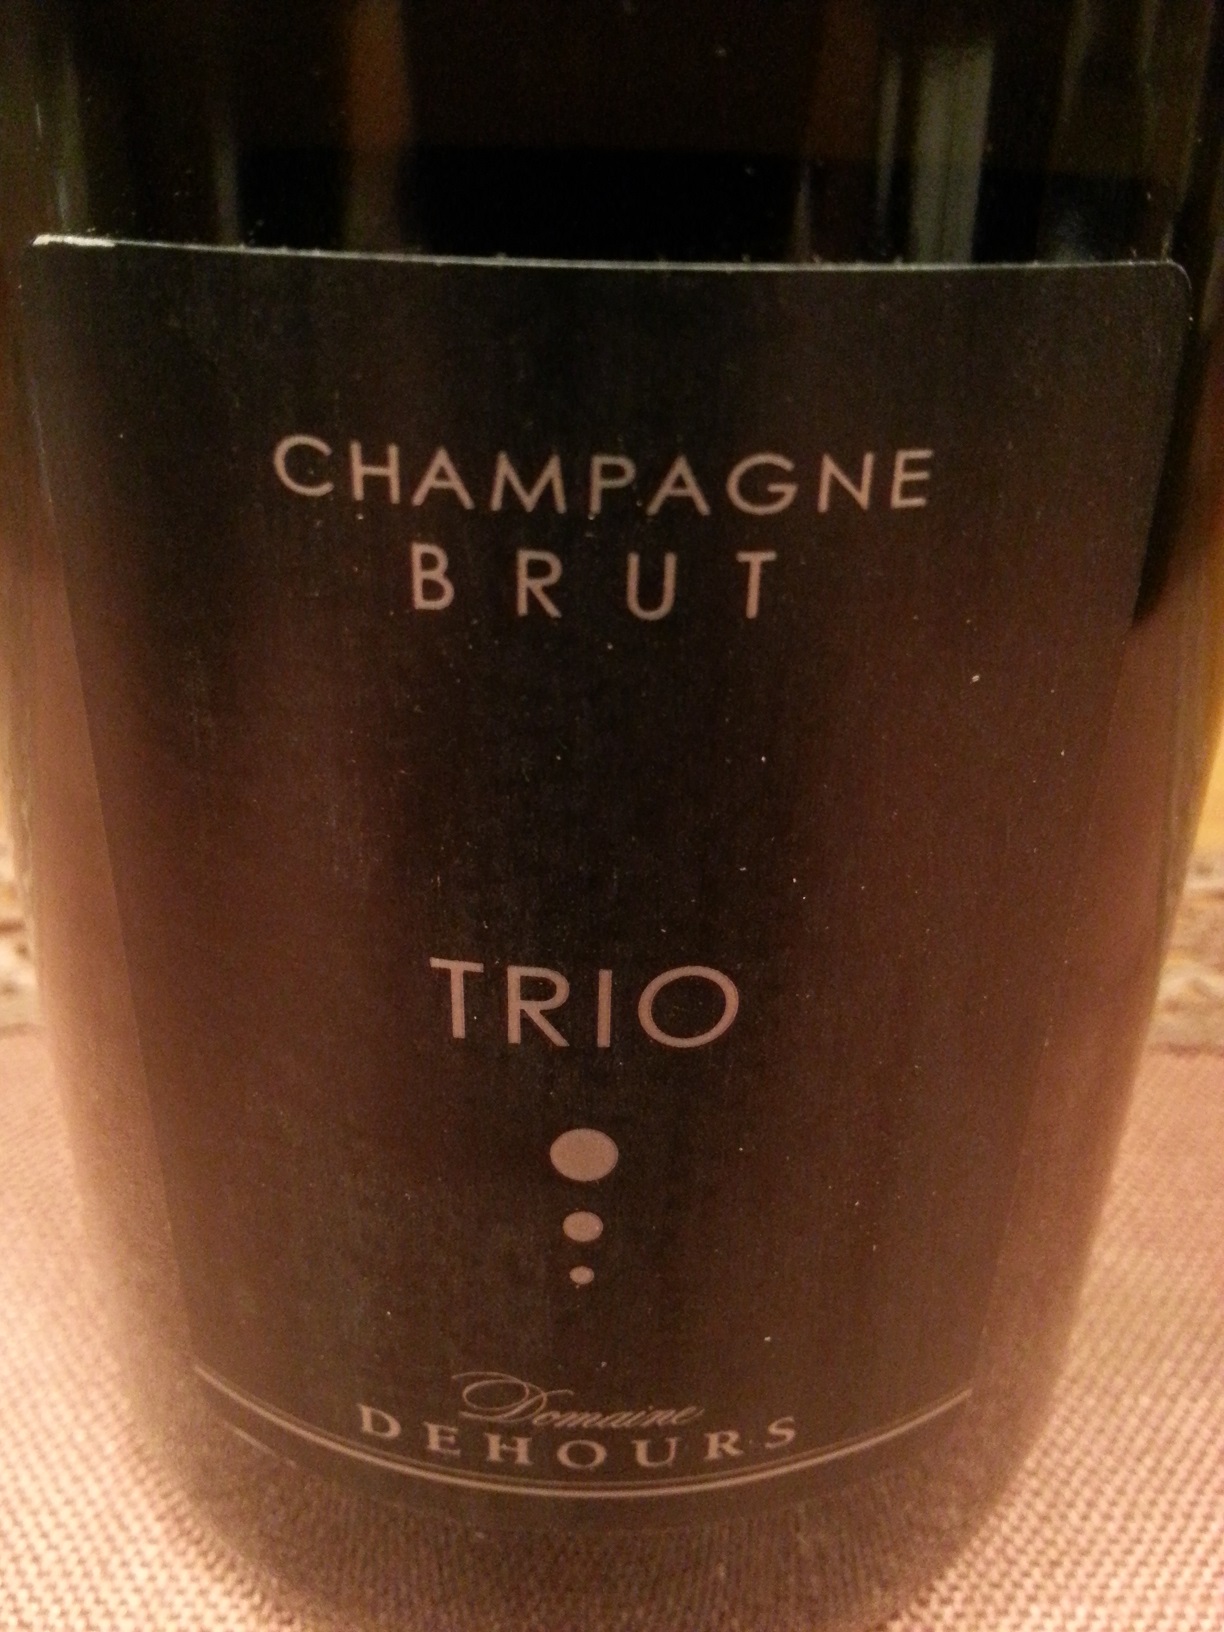 2010 Champagne Trio S Extra Brut | Dehours